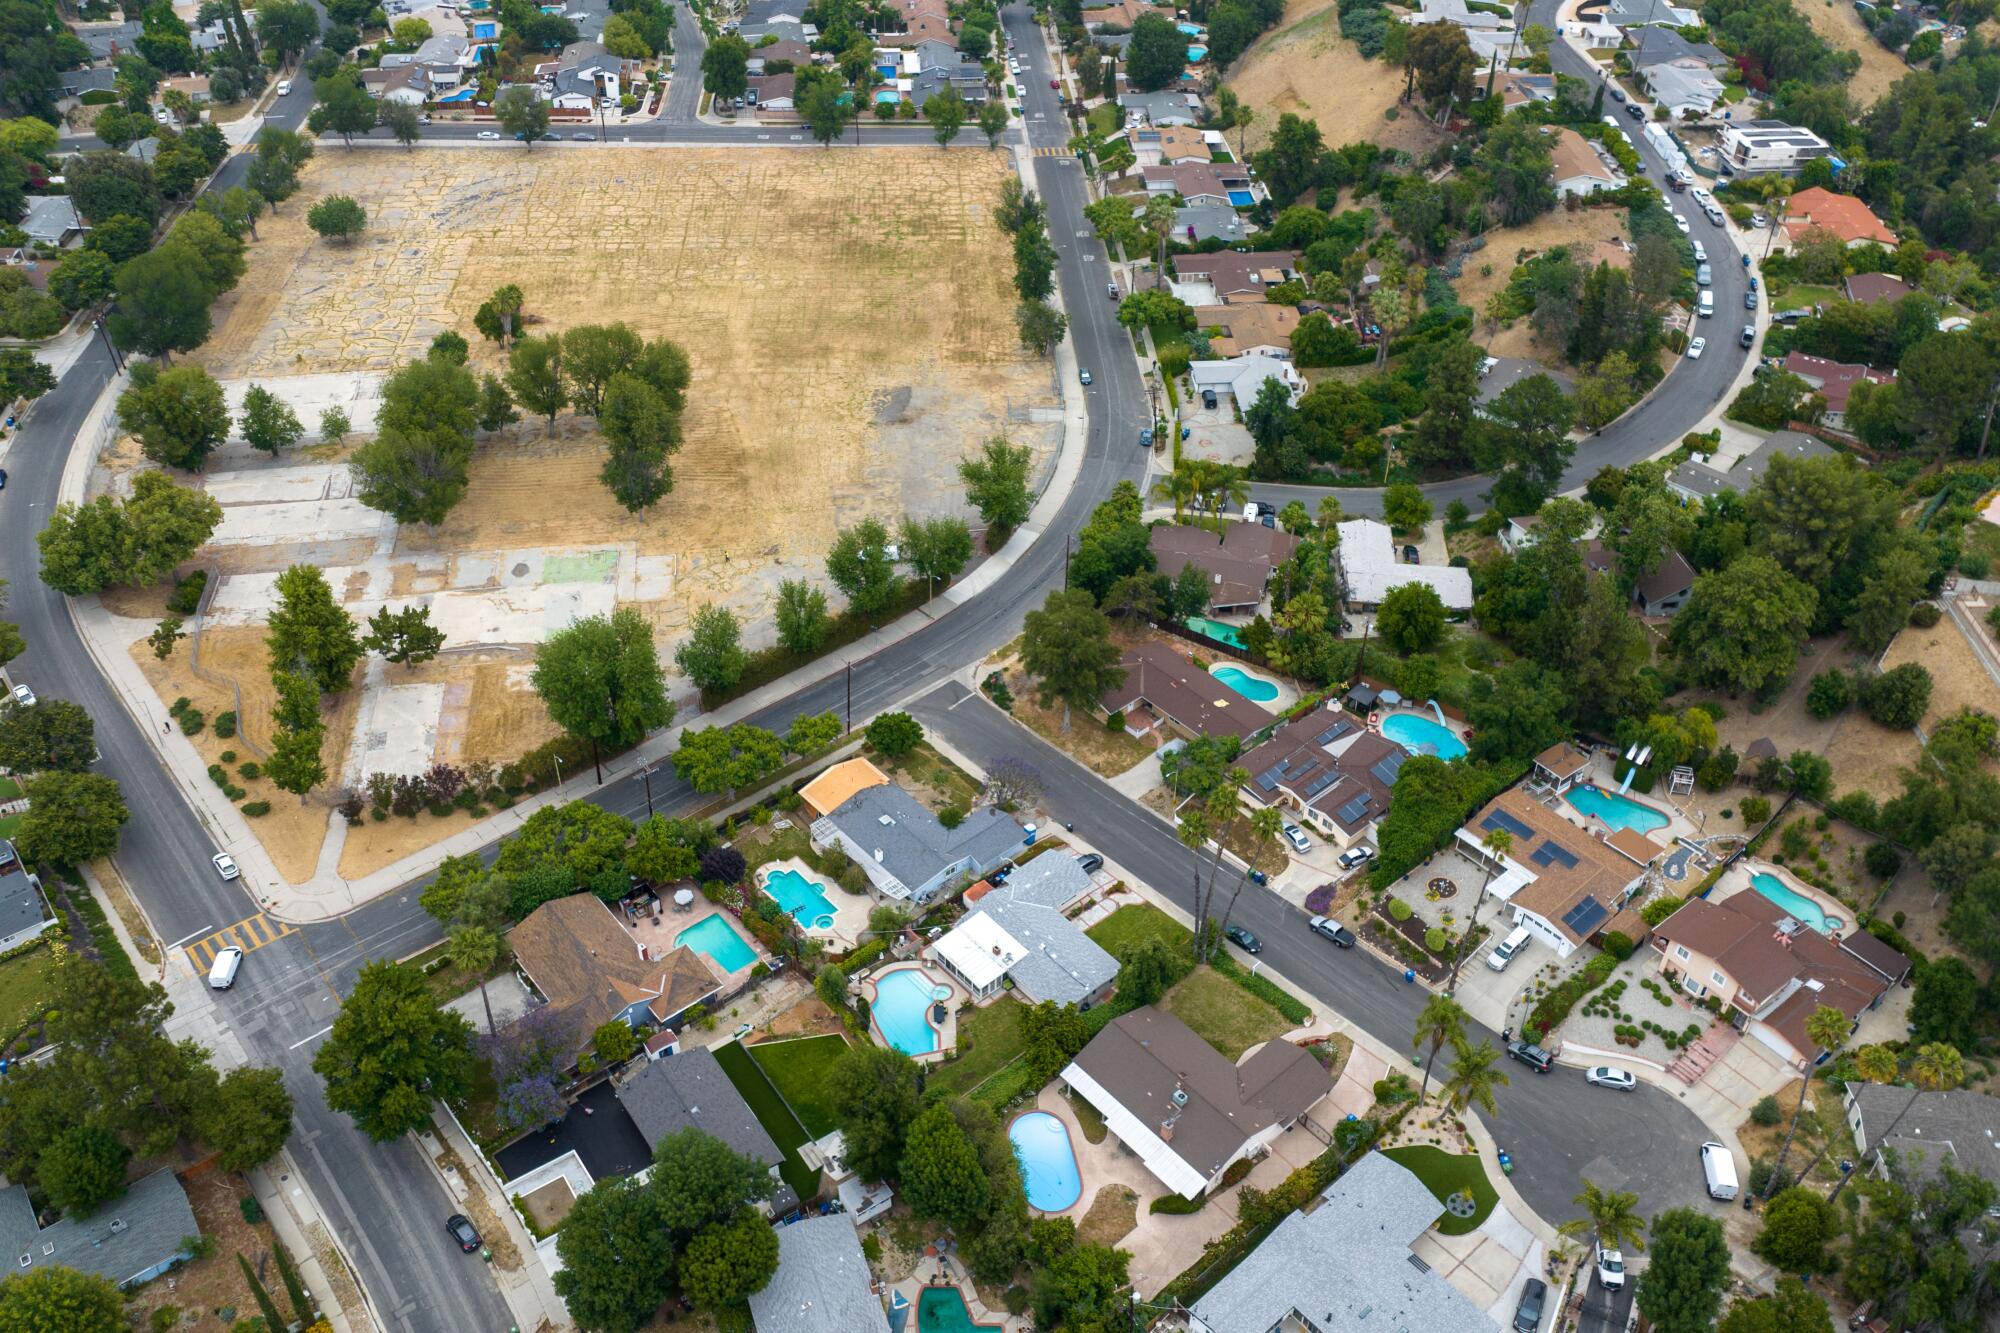 A mostly vacant lot is surrounded by houses in a neighborhood.